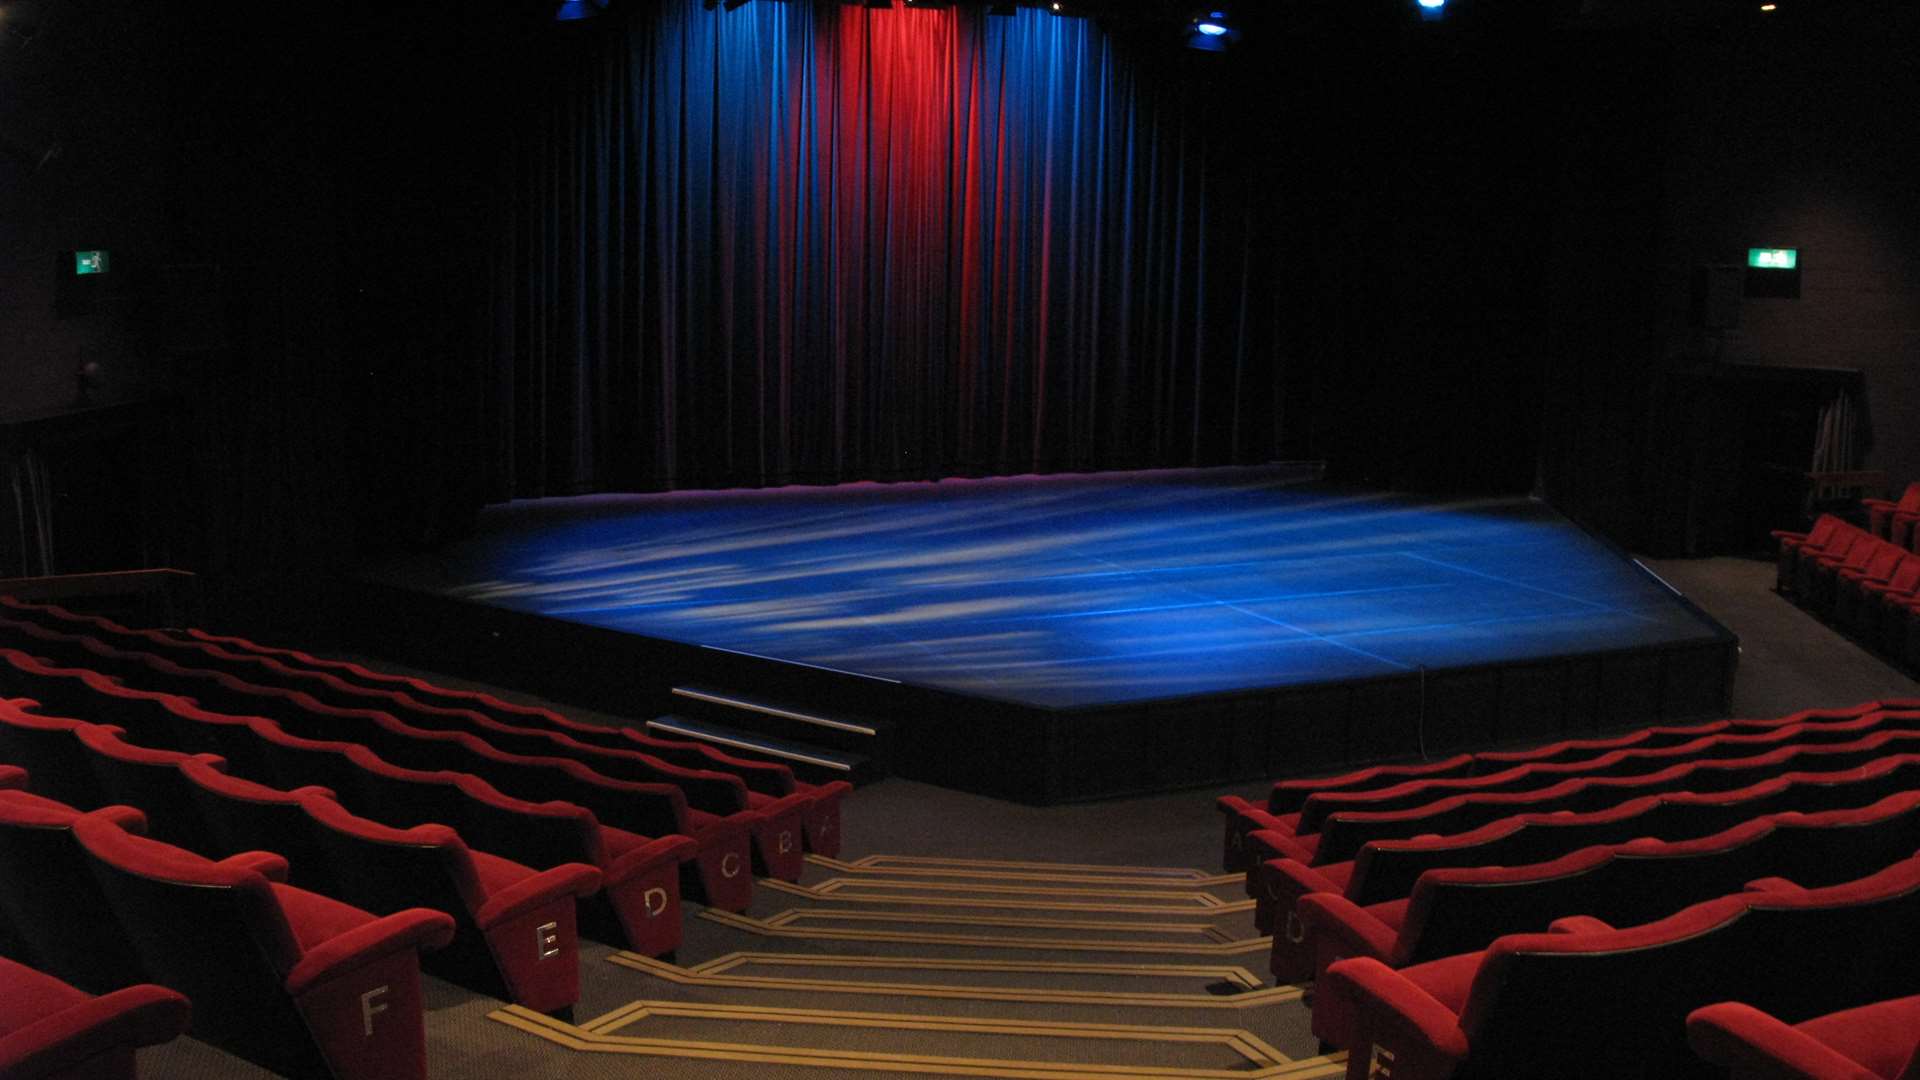 The Gulbenkian is the perfect place for children to experience live theatre